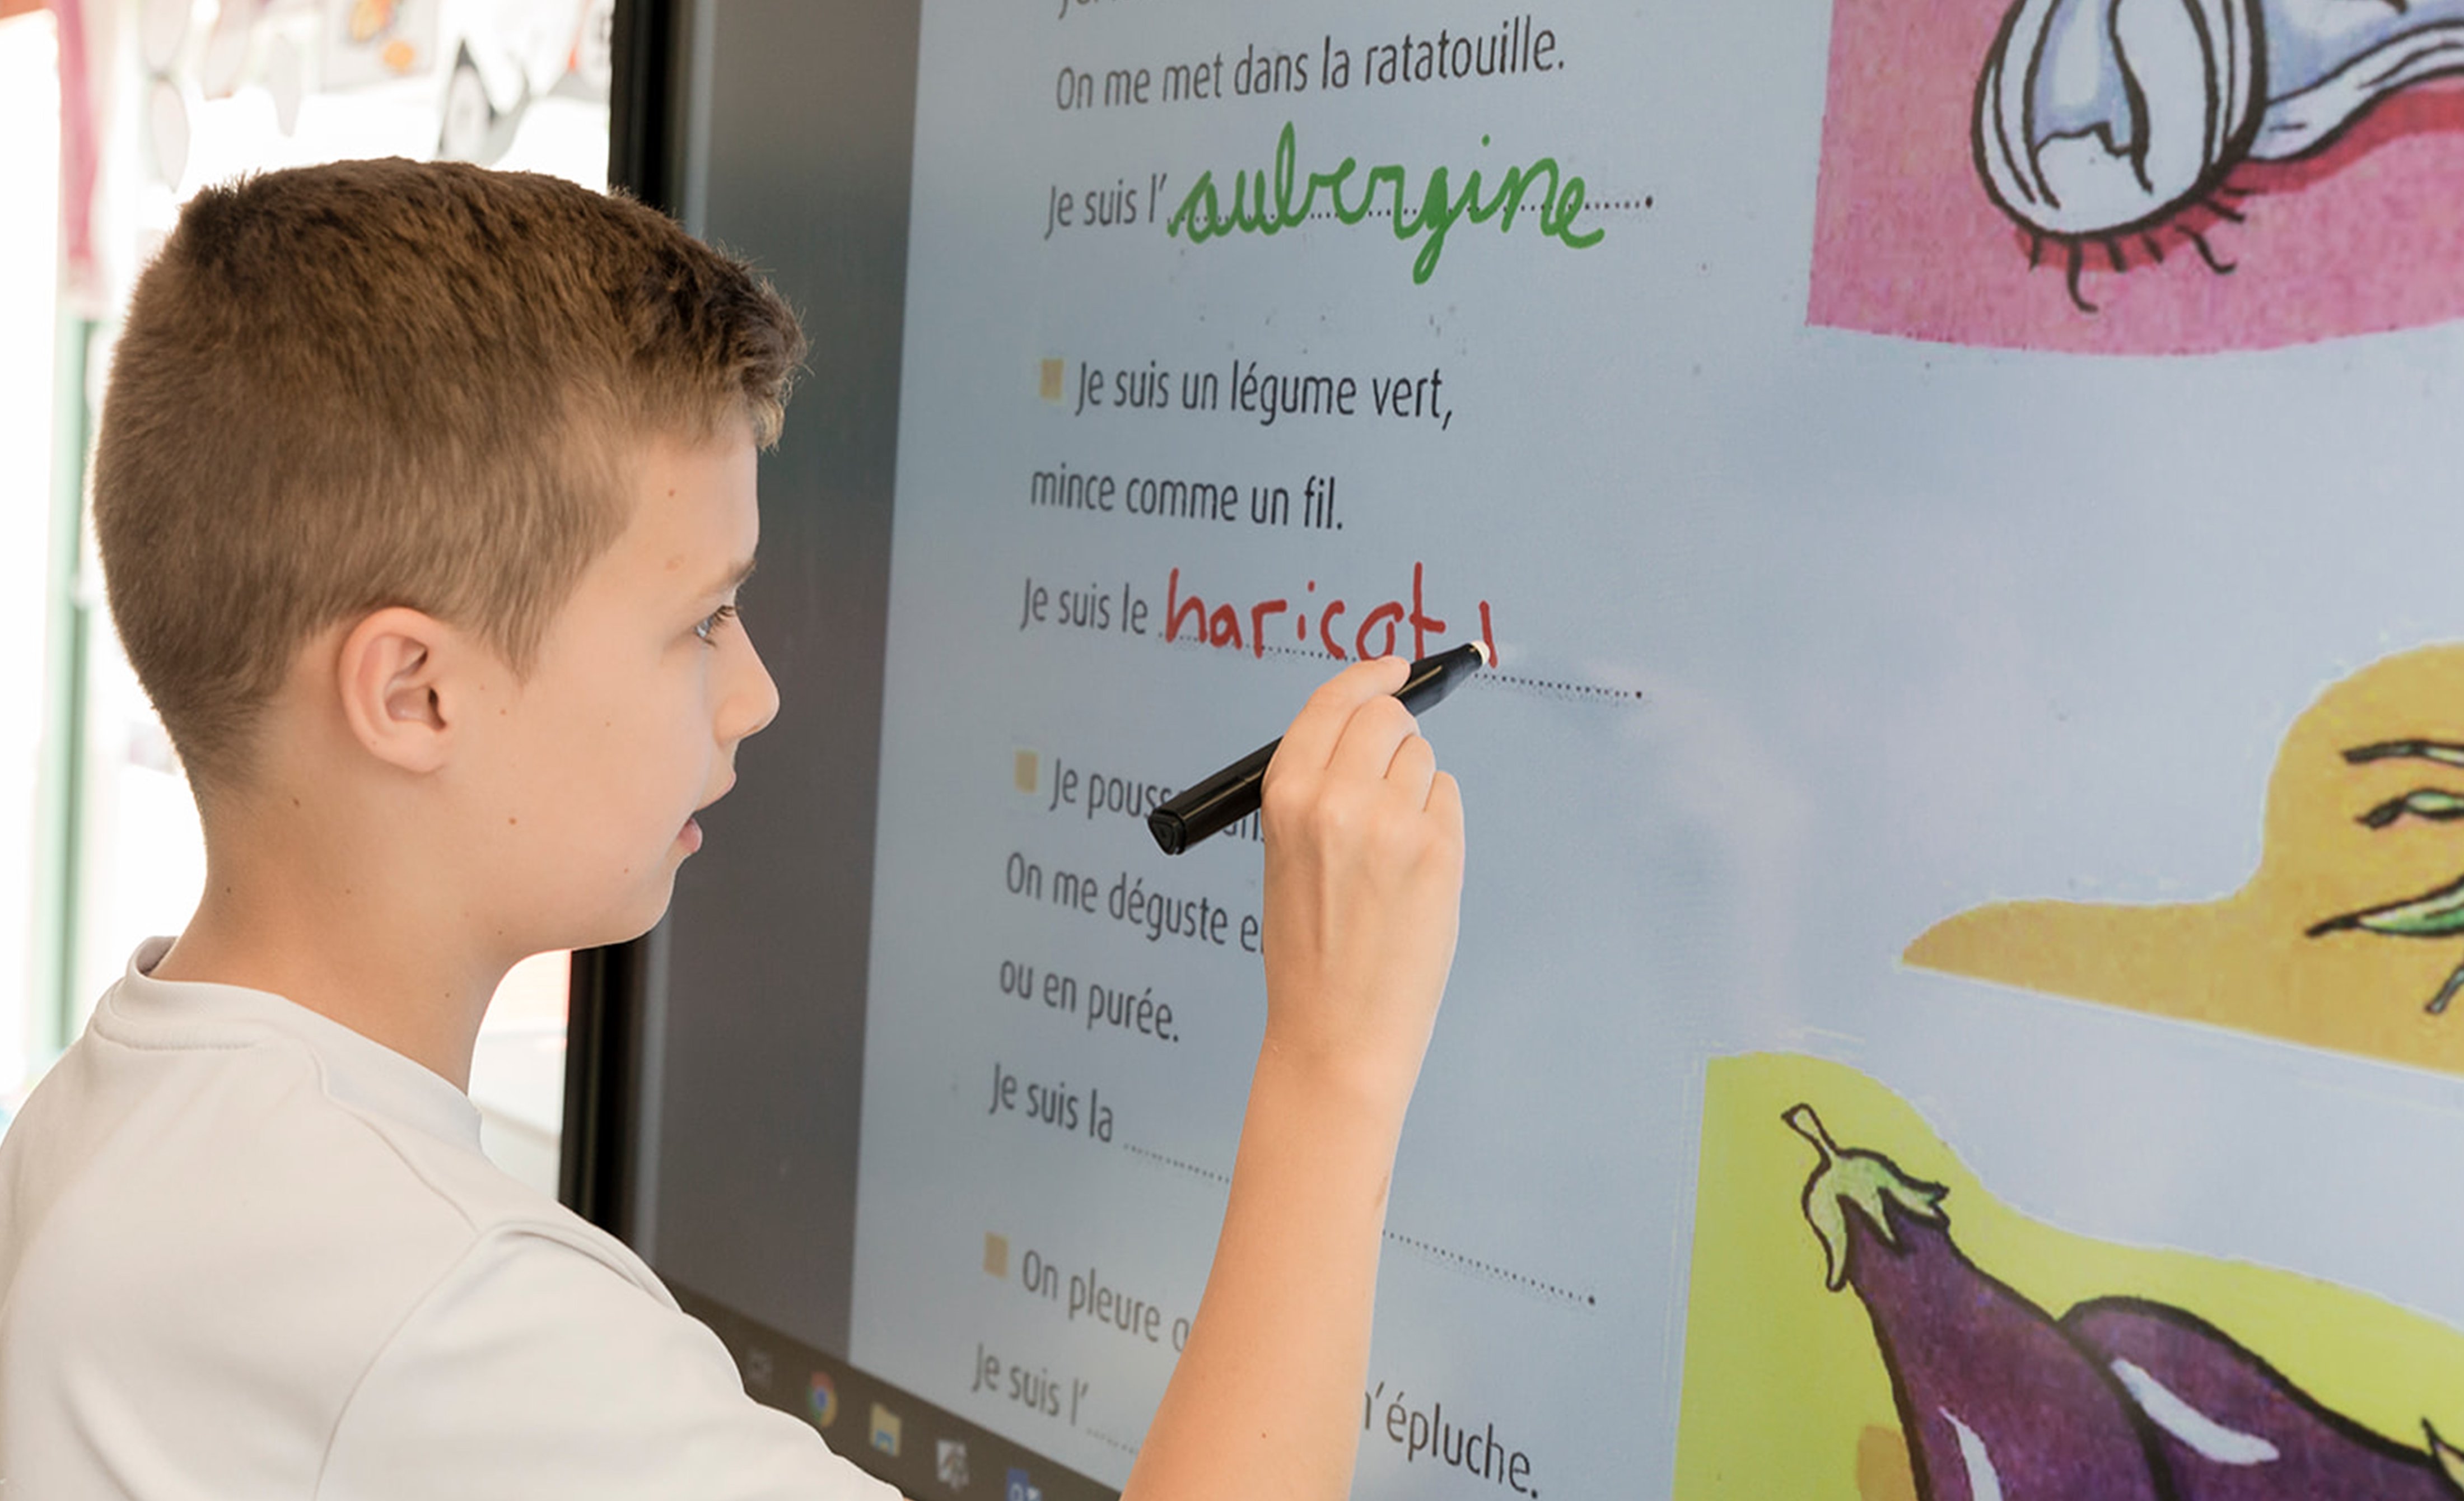 THE IMPORTANCE OF MAINTAINING A BILINGUAL EDUCATION